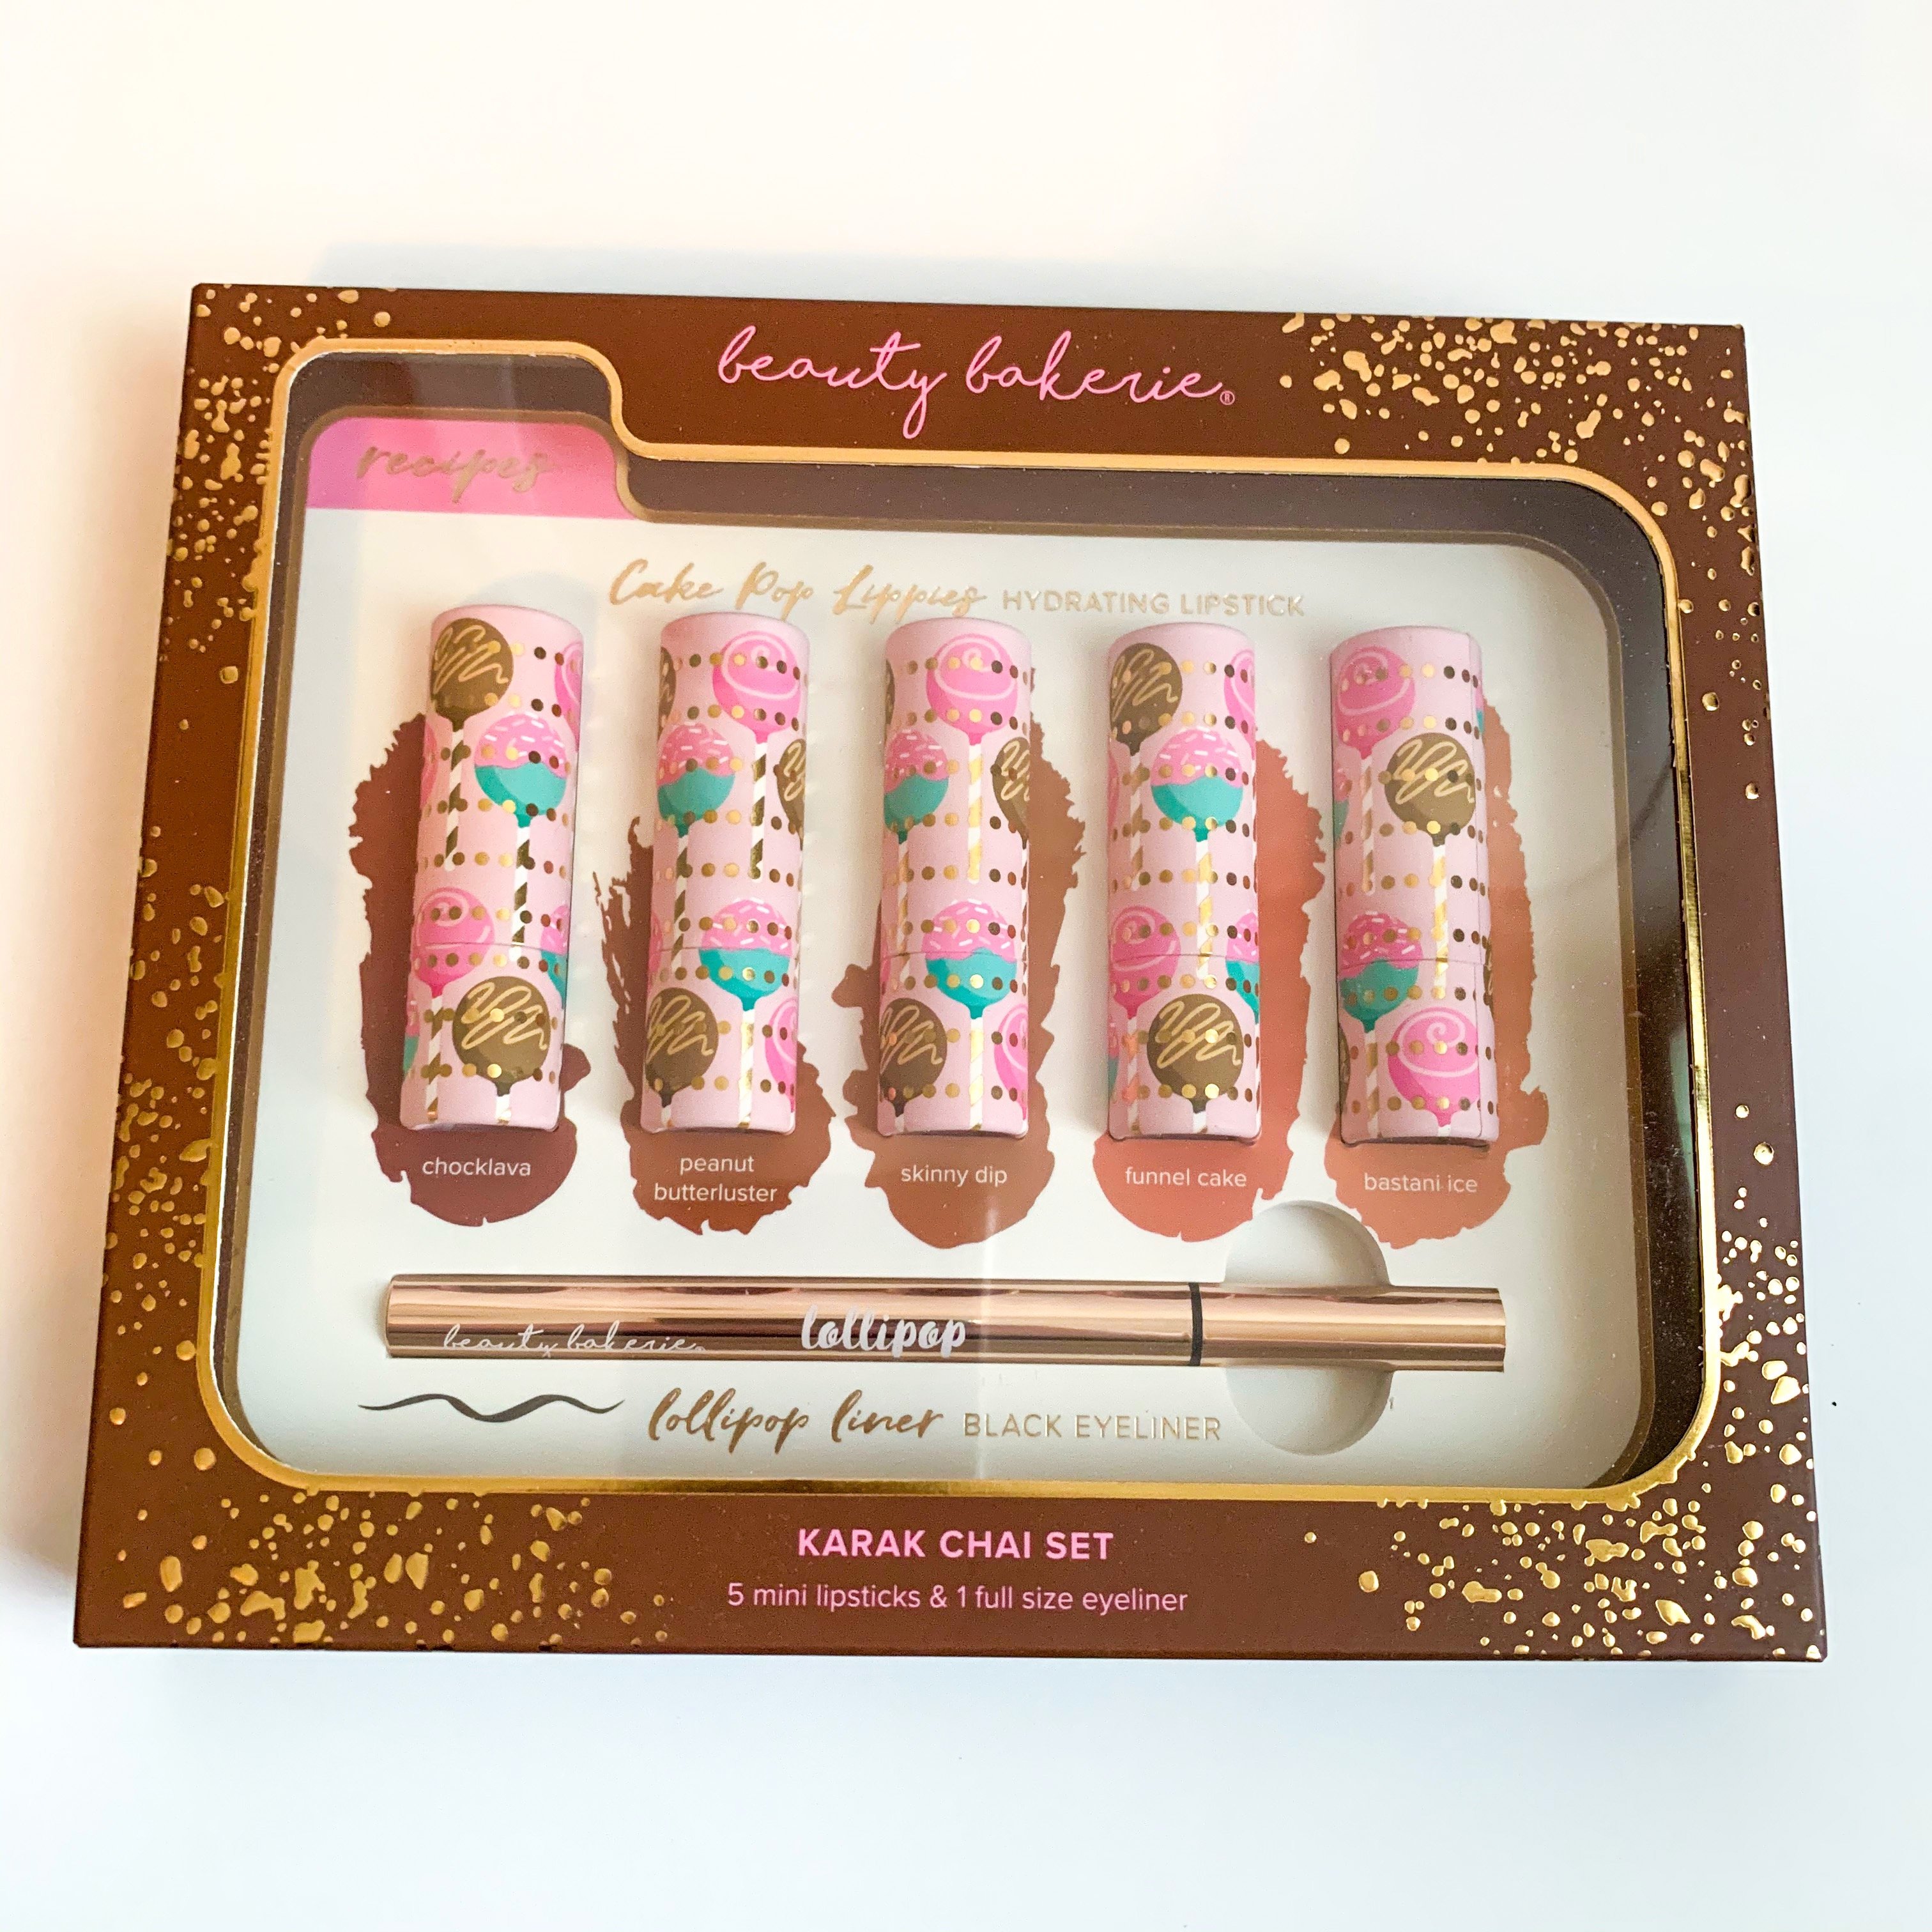 Beauty Mystery Bundle Review August 2020 MSA